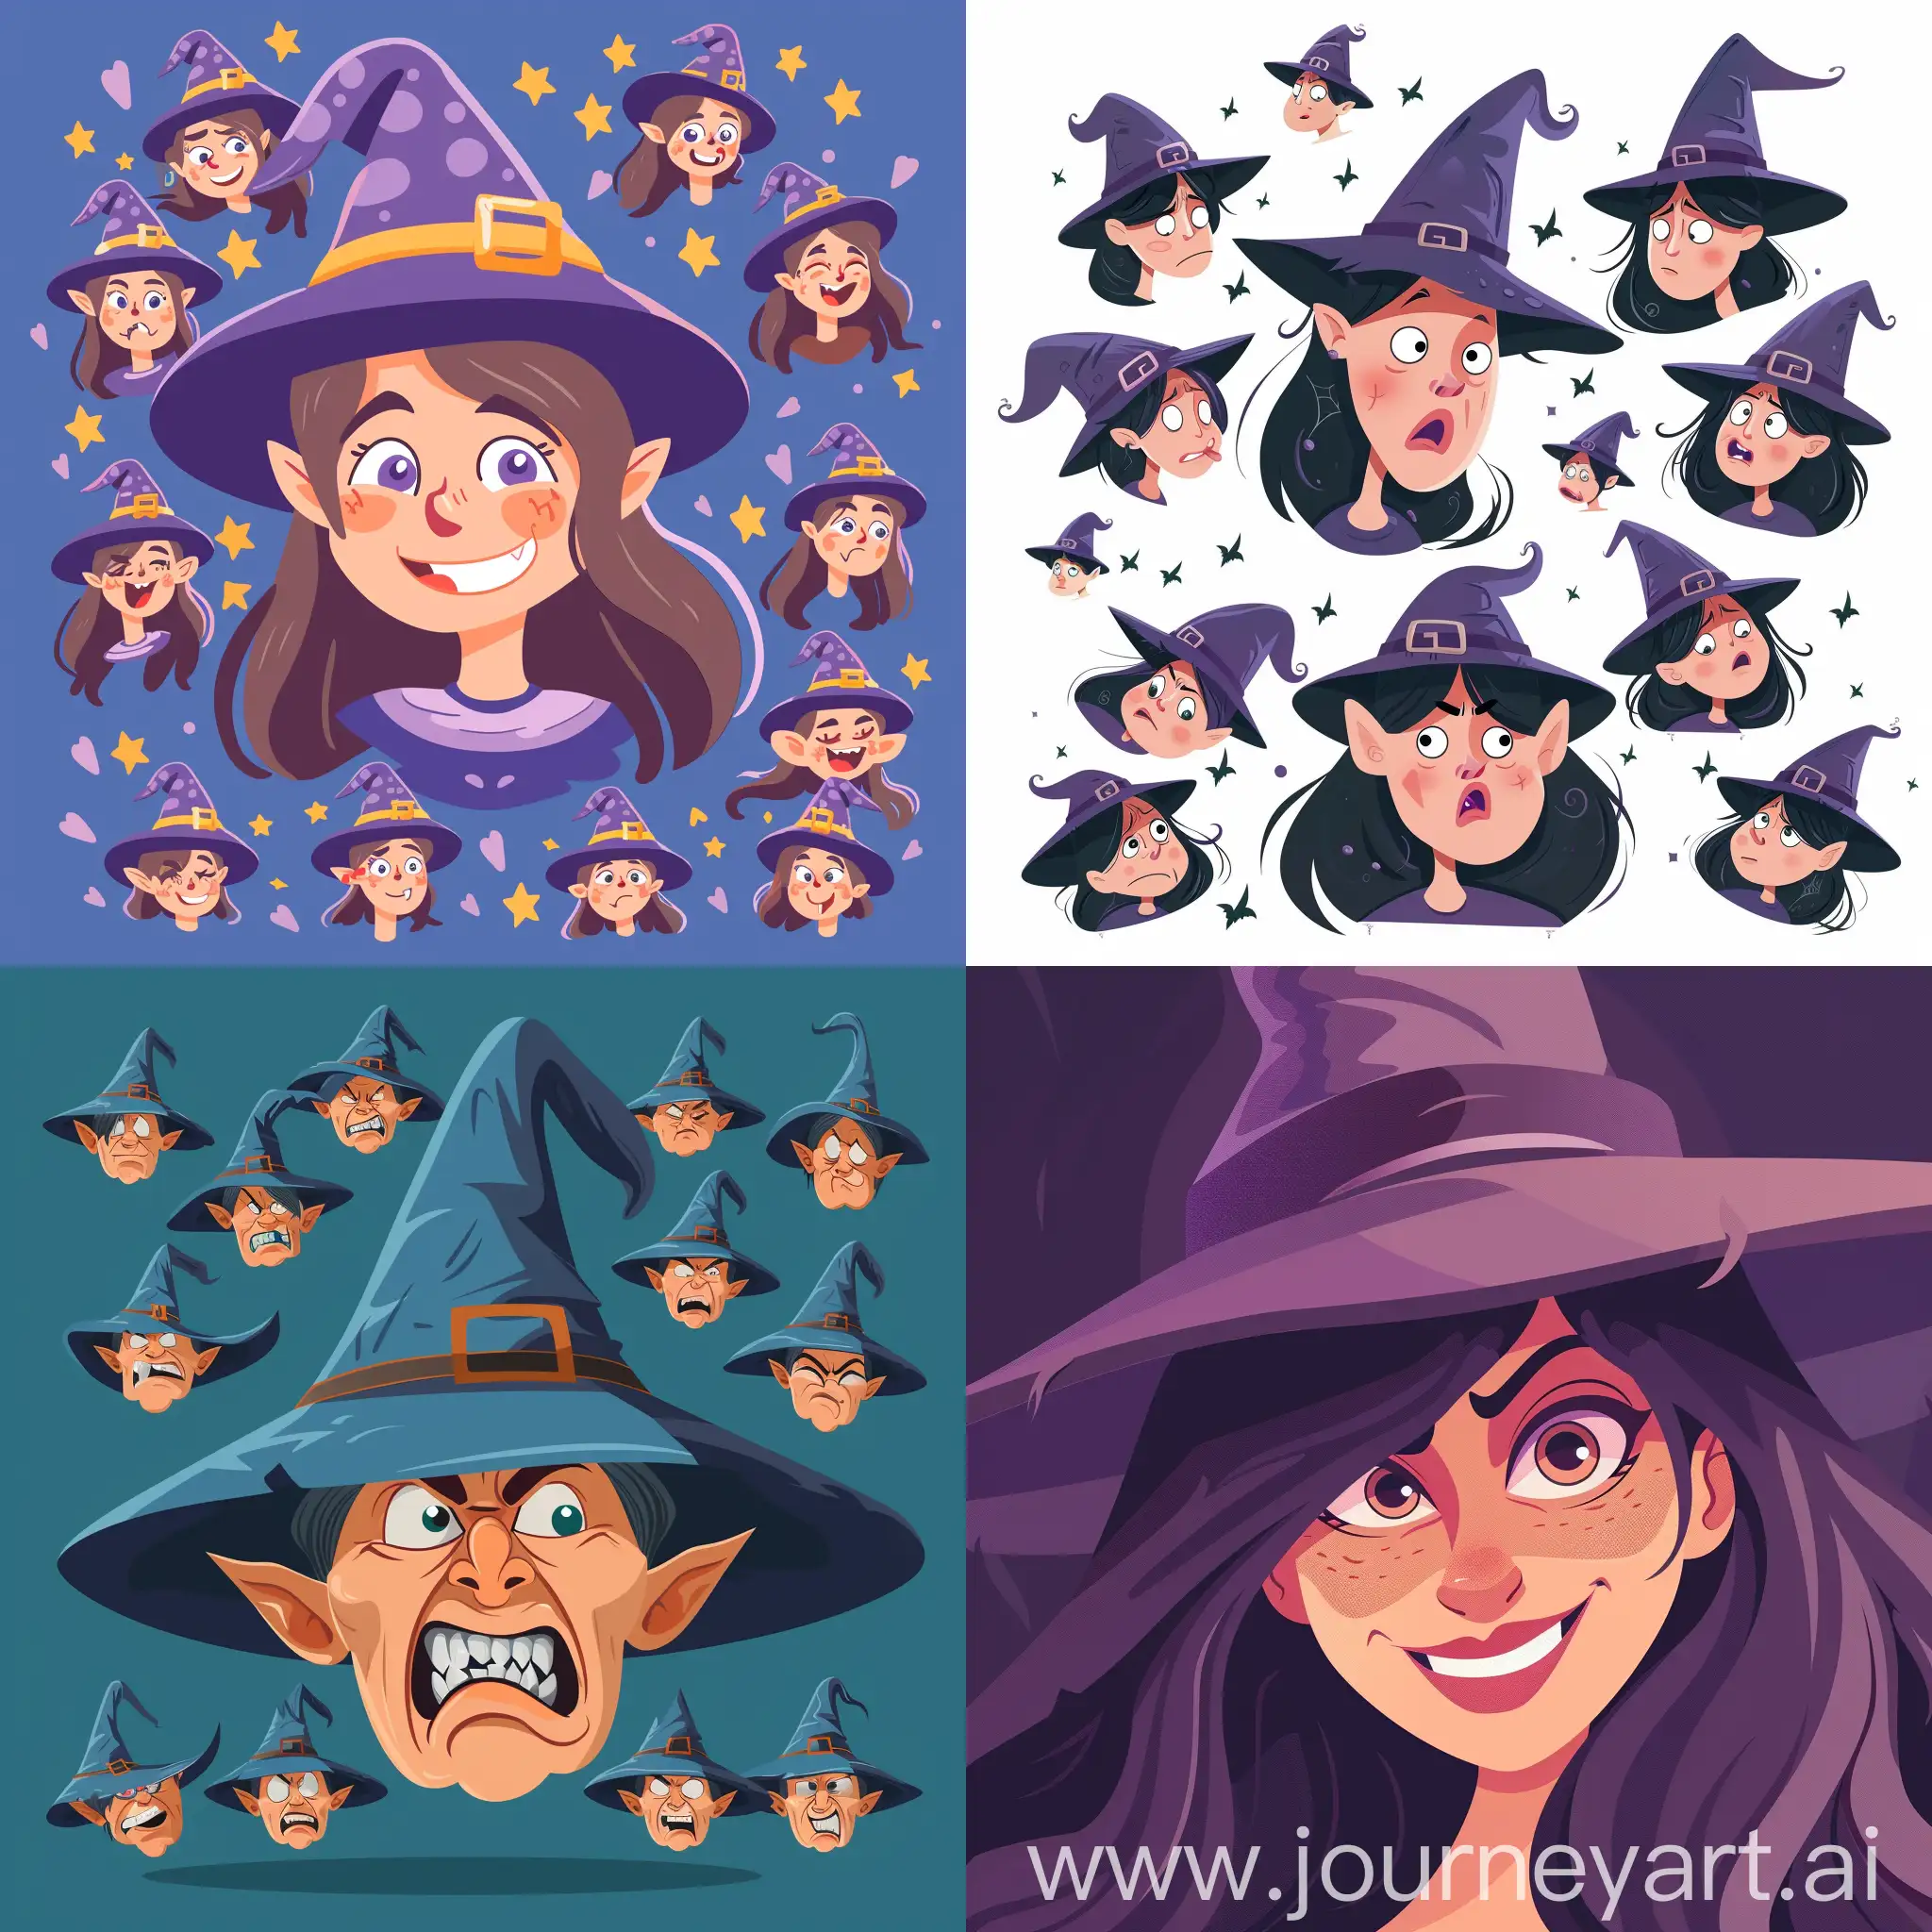 The cartoon character is a funny witch, her face is in the background a lot, they have different emotions., in high quality flat style